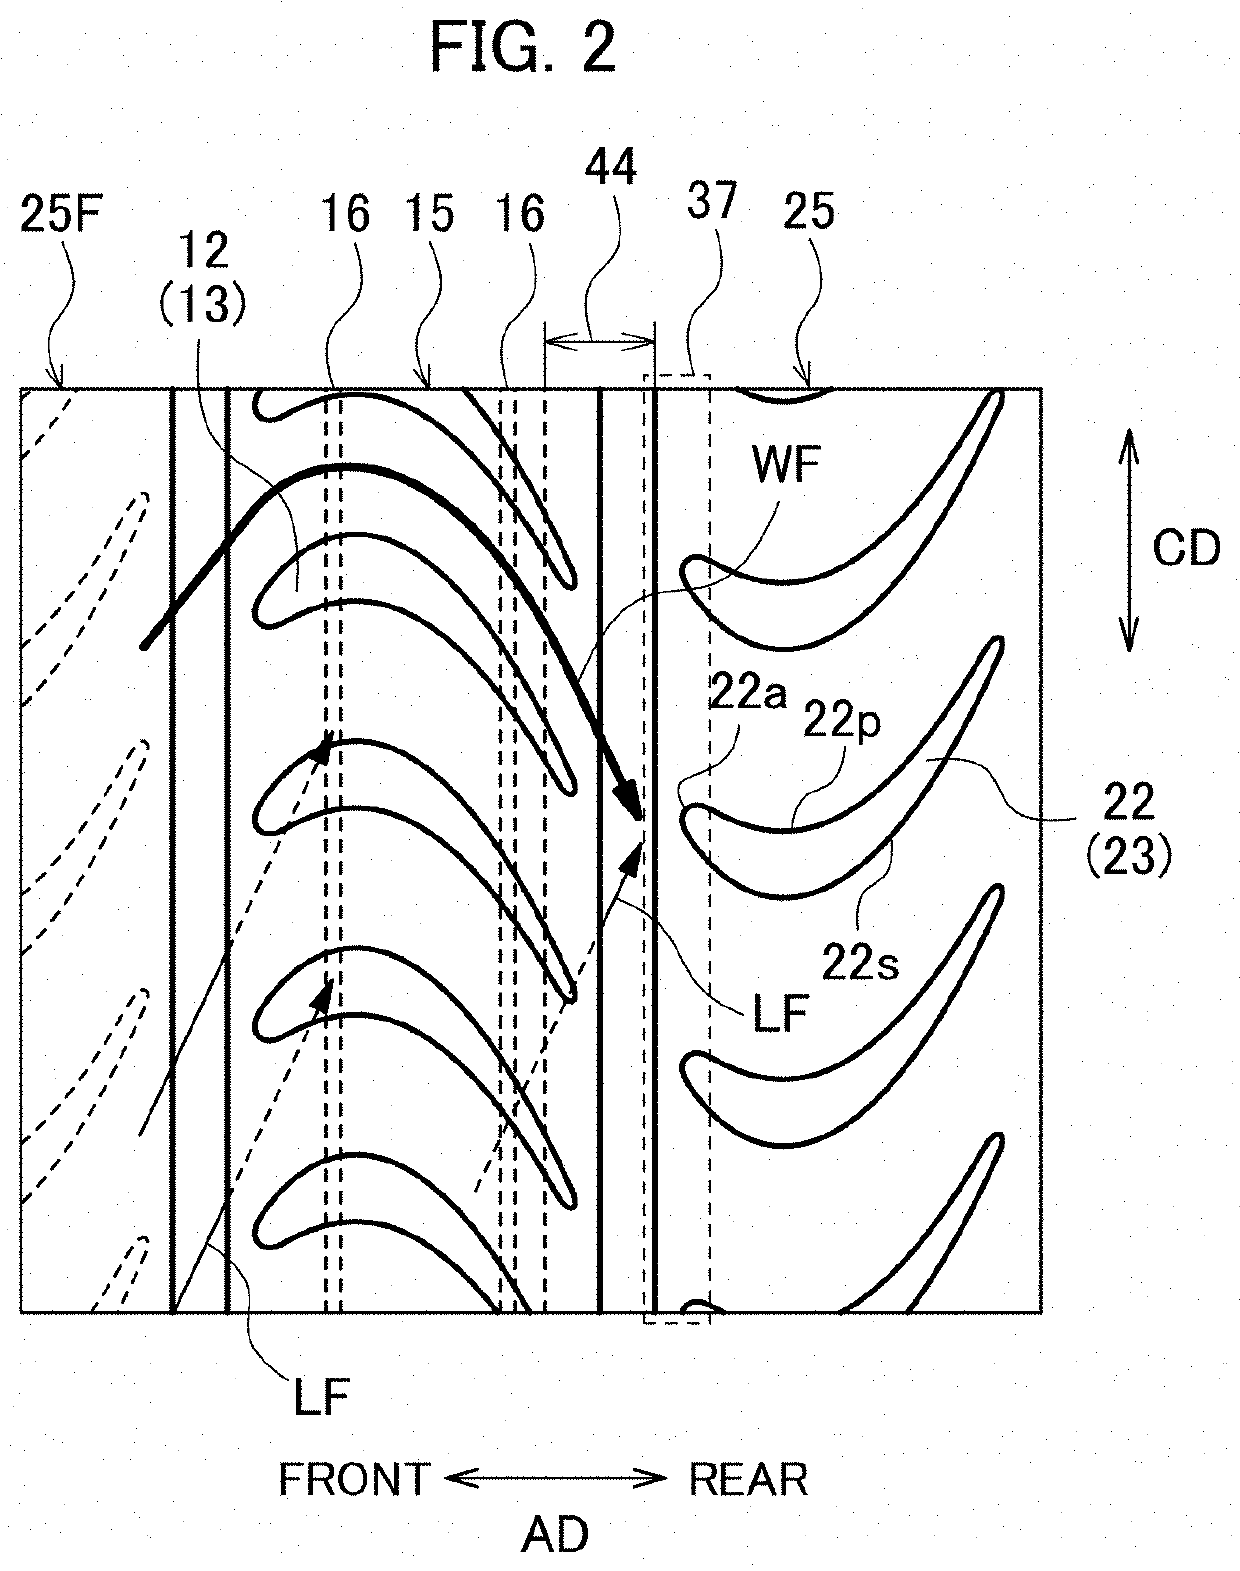 Secondary flow suppression structure